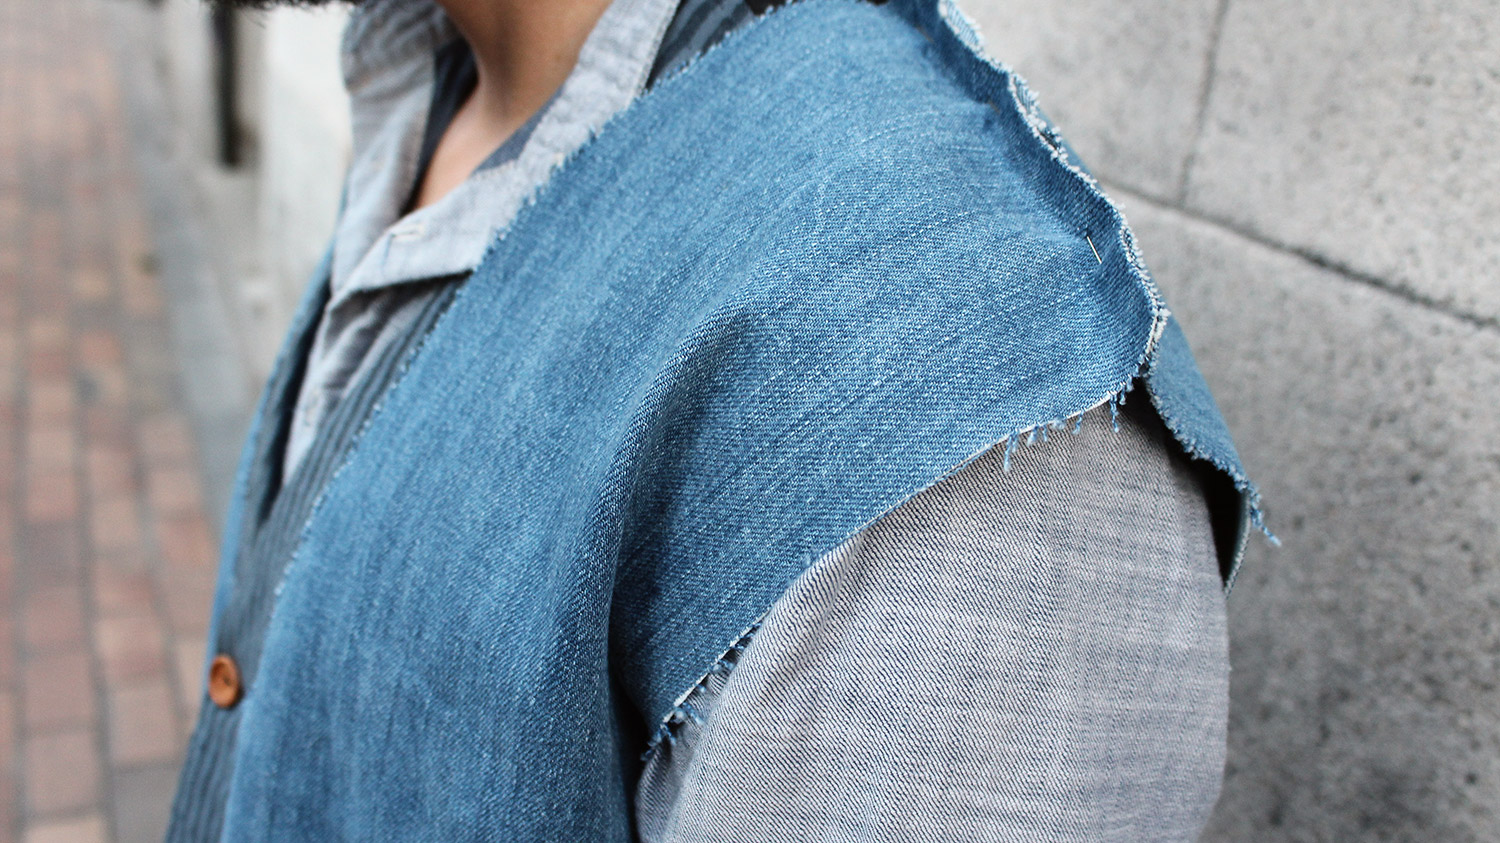 TheConcrete_WorkJacket_Washed_process_14